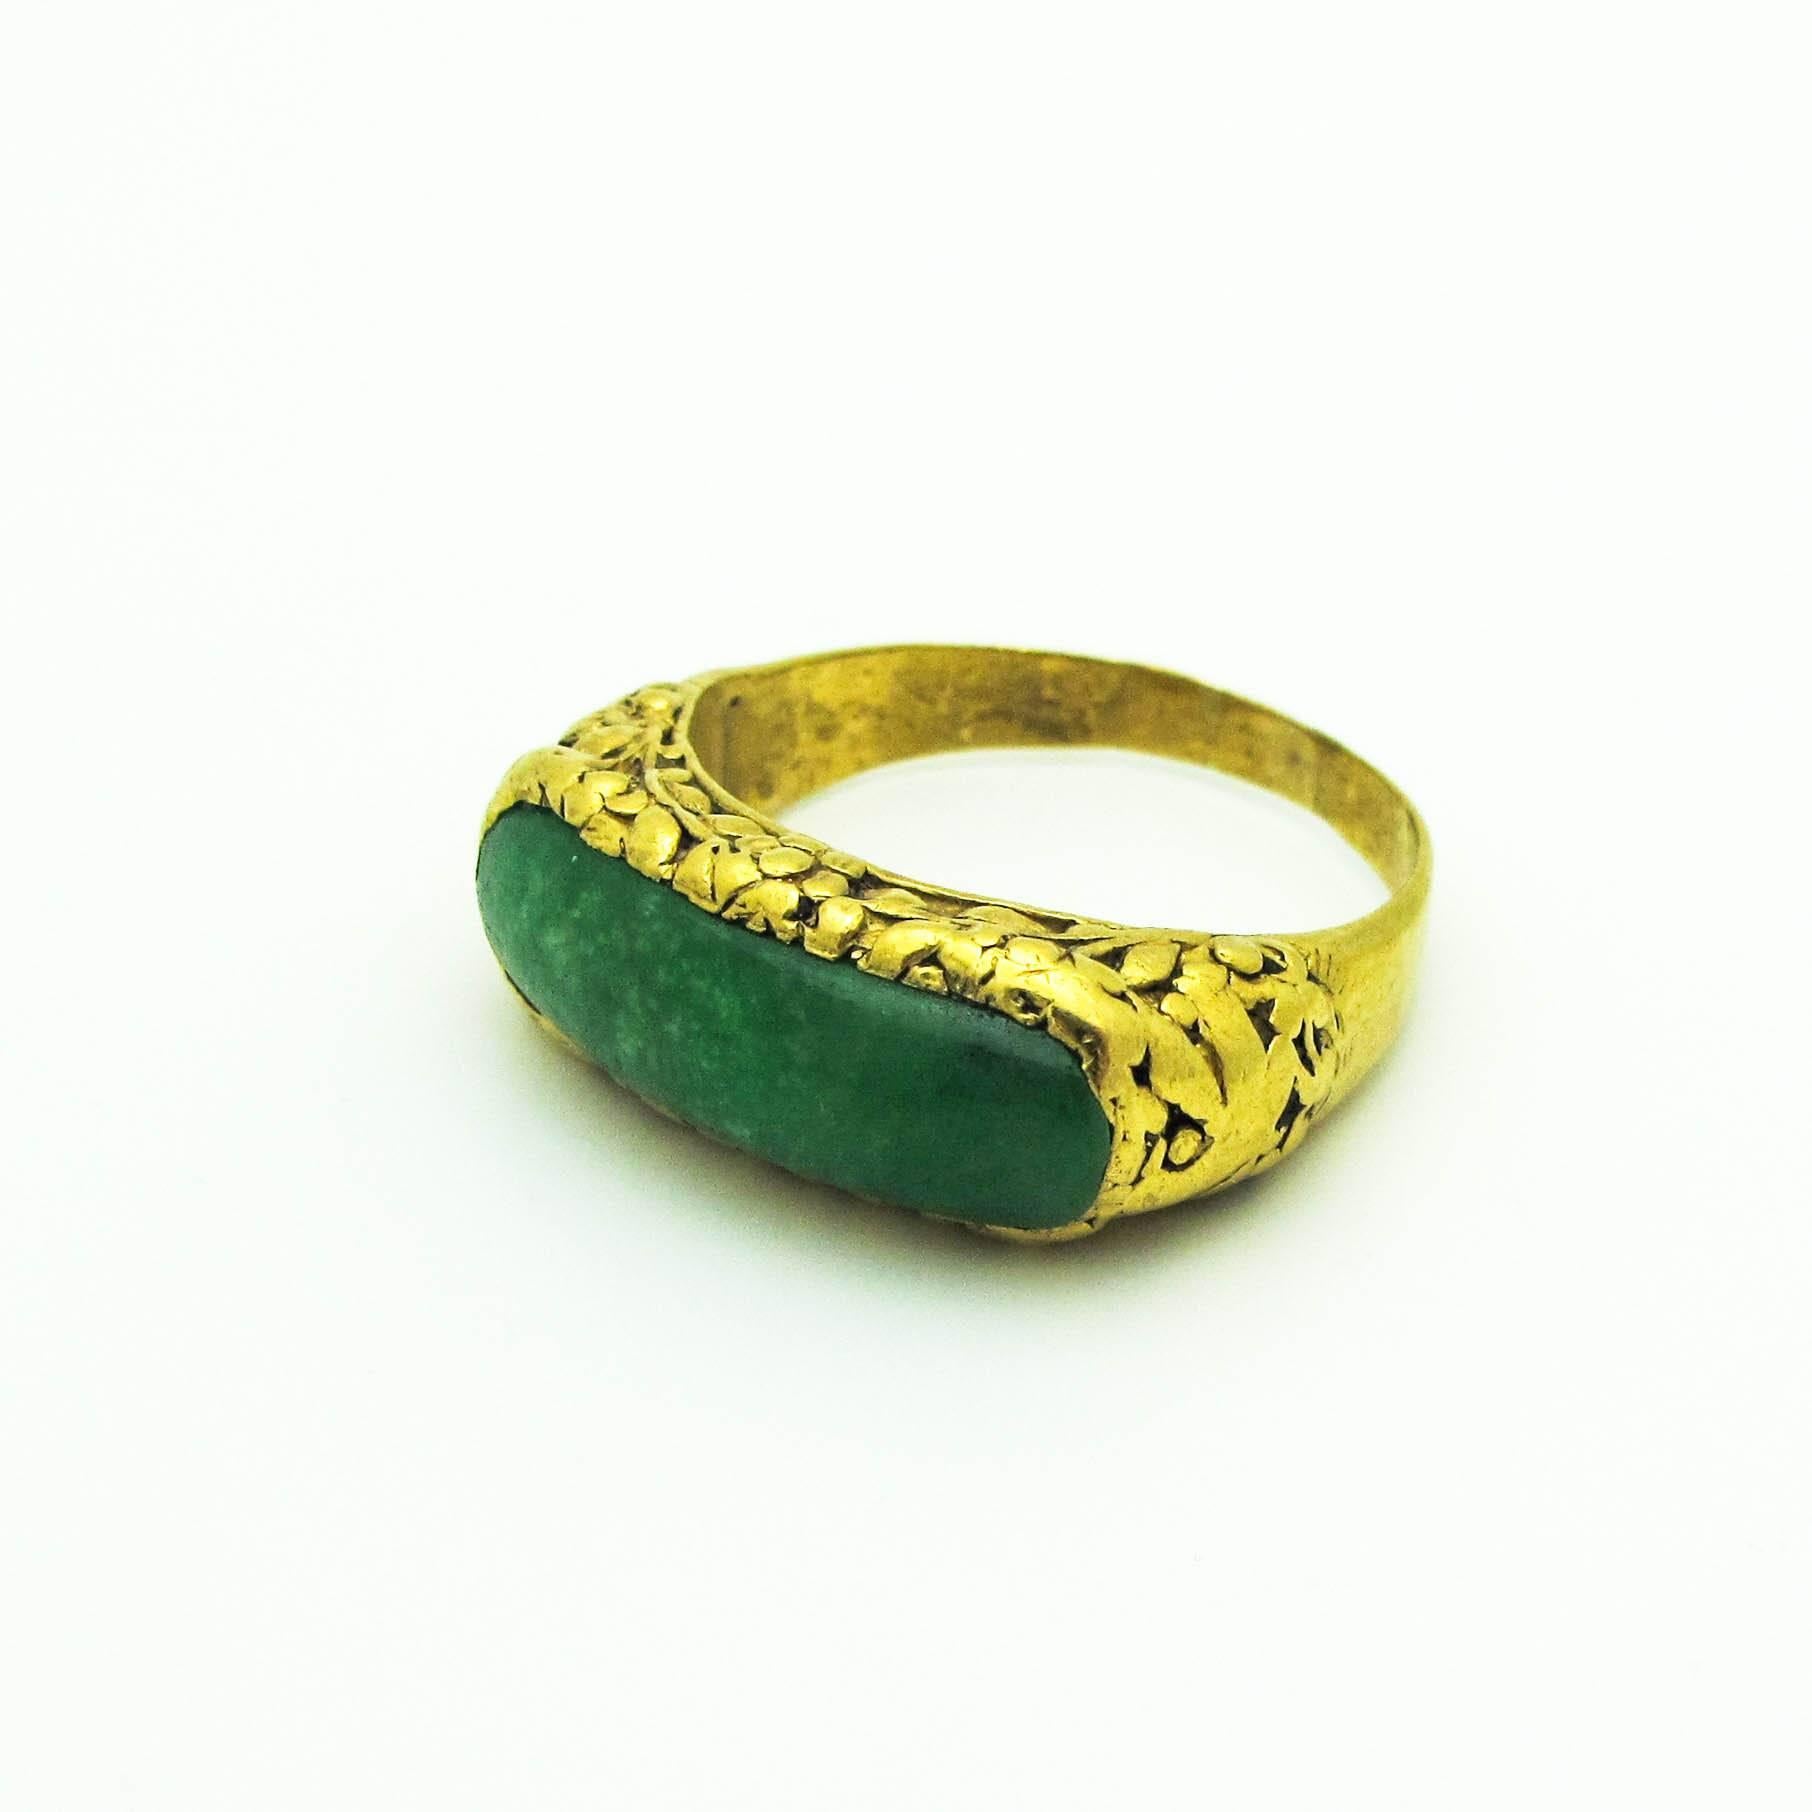 24k Gold ring with floral engravings on side. back of ring stamped TINFOOK 24k. Curved jade bar pendant, size 9